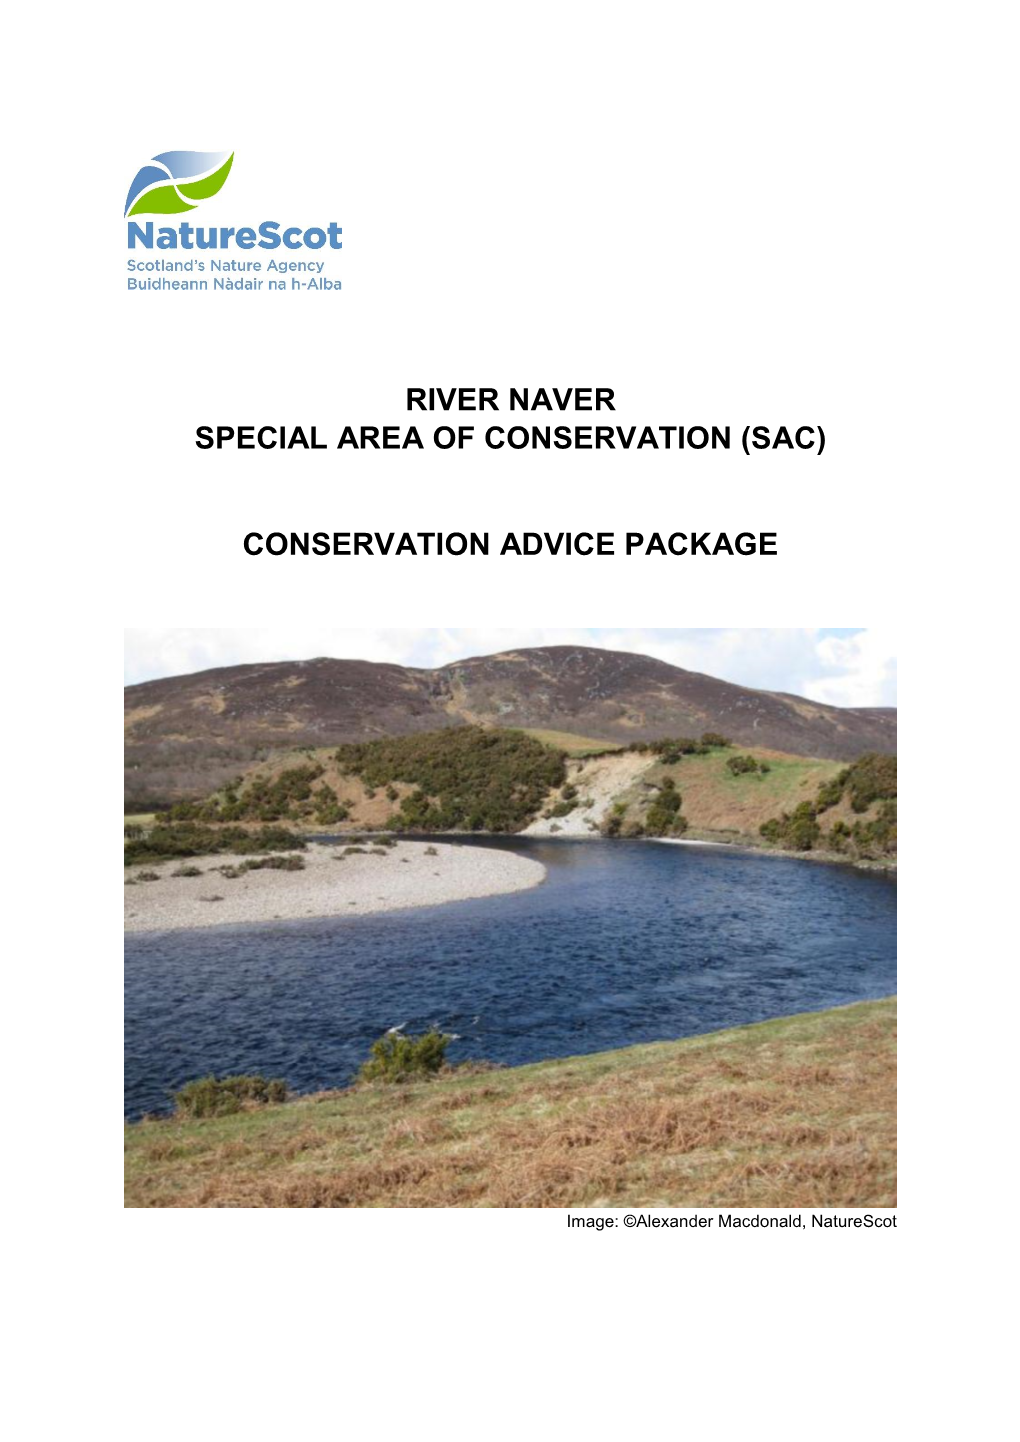 Conservation Advice Package